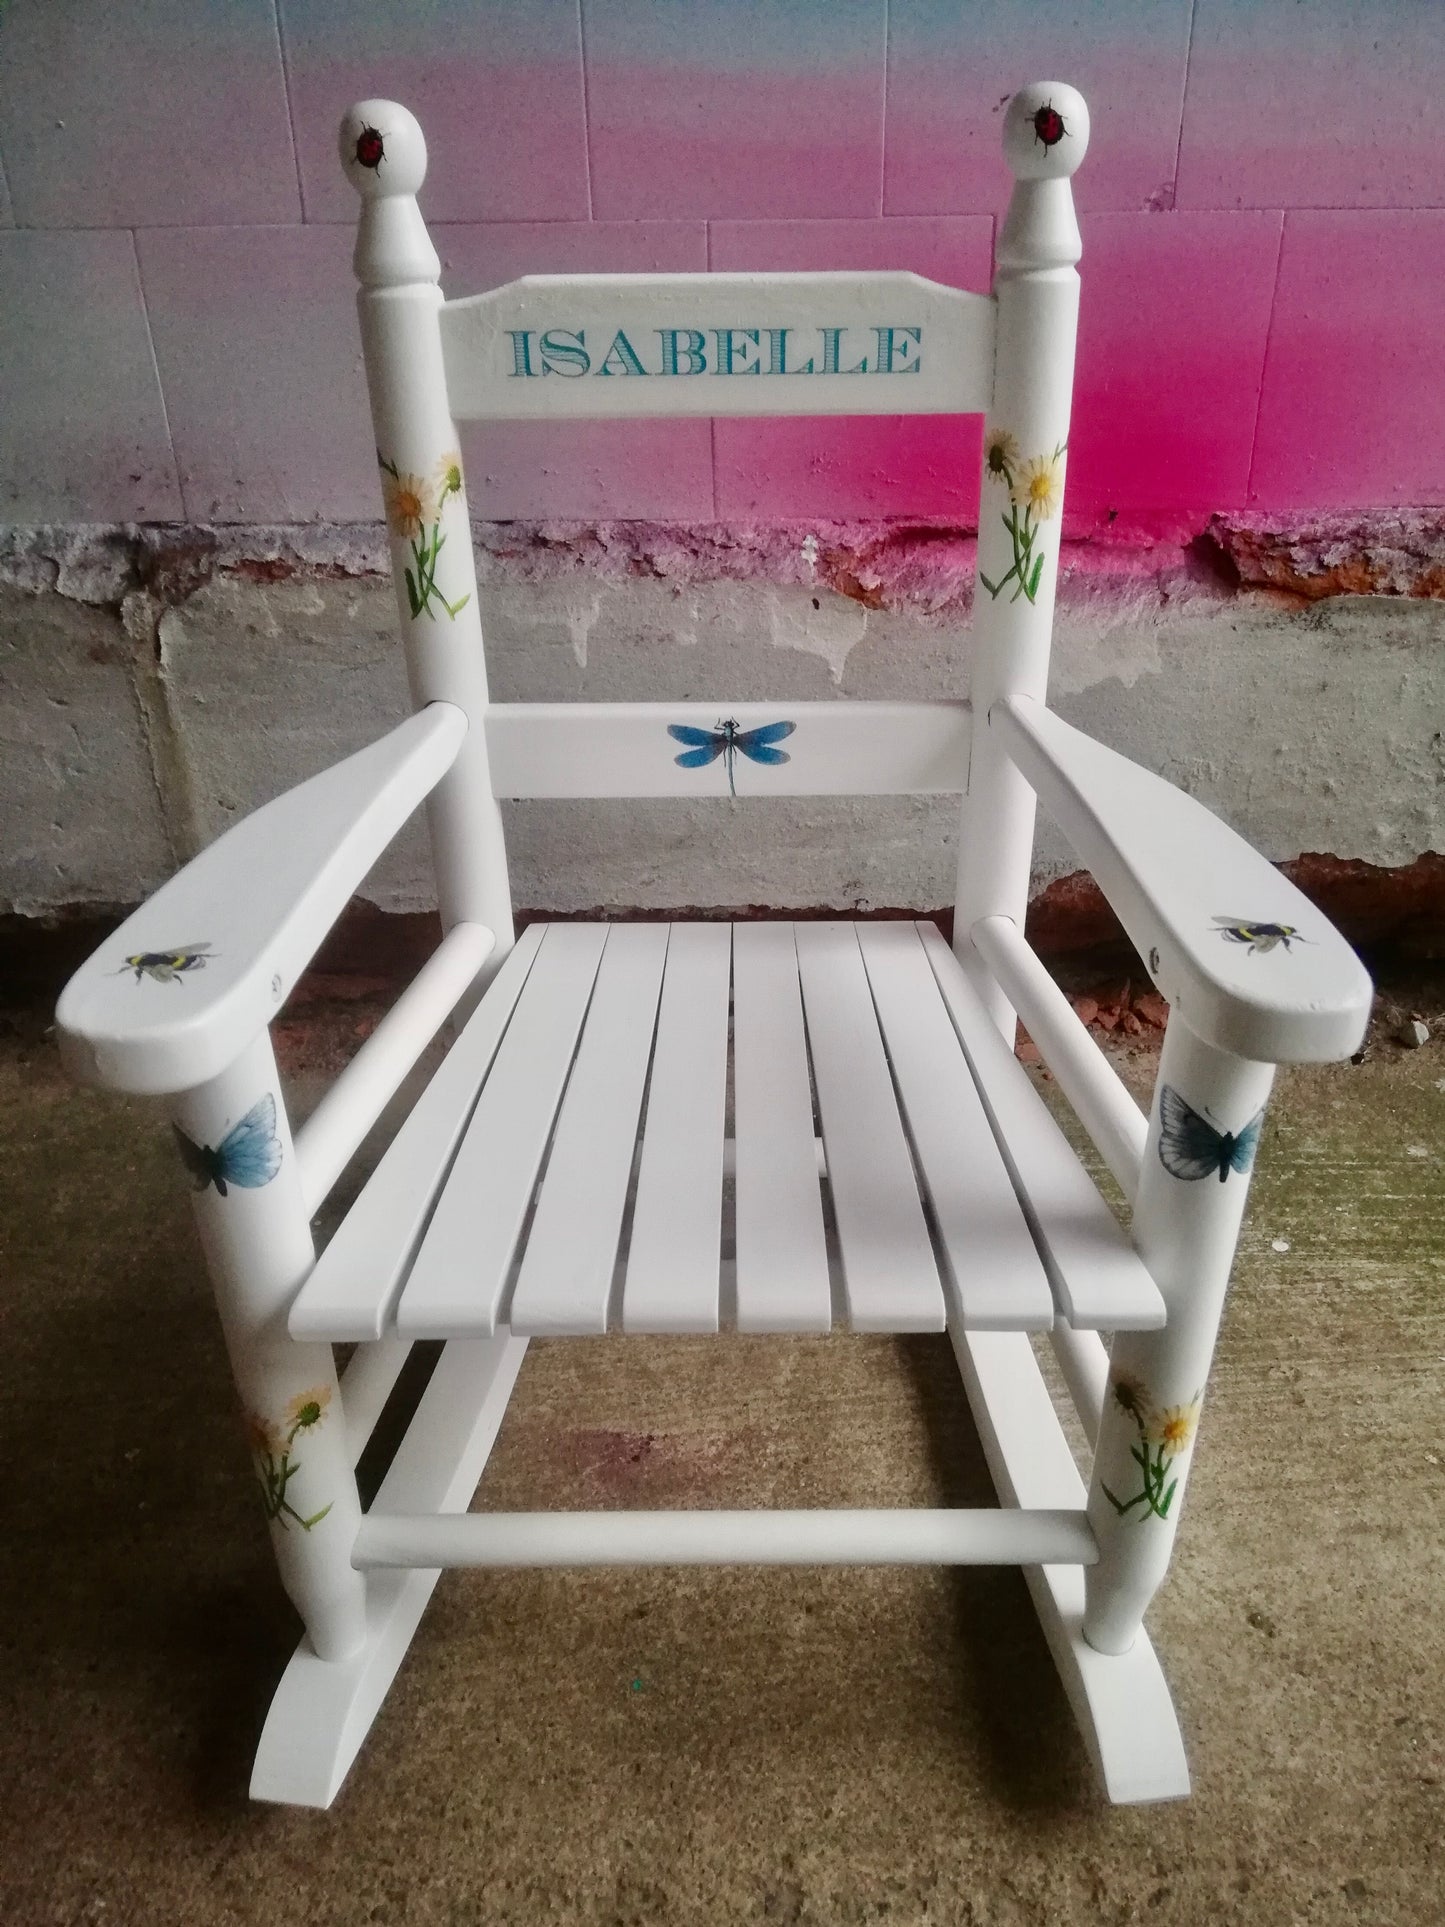 Personalised children's rocking chair - Dragonfly friends theme - made to order